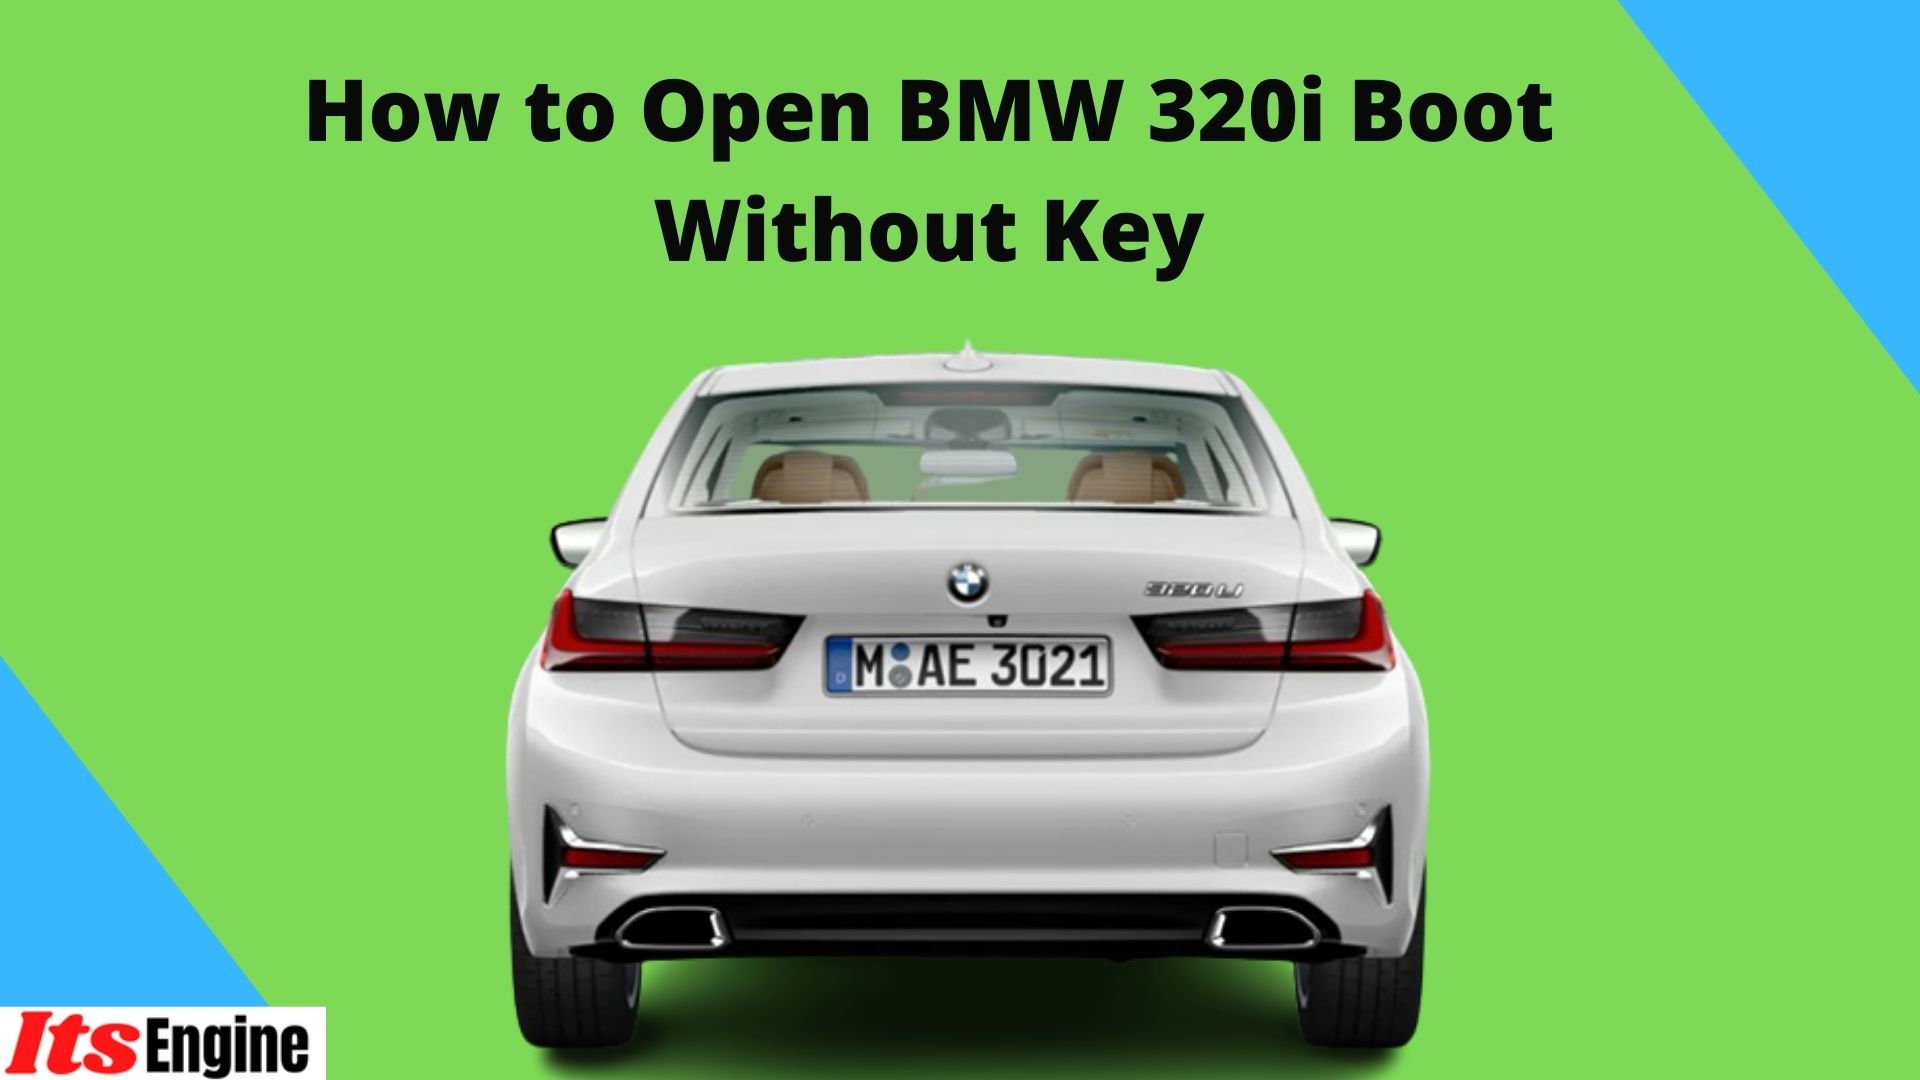 How to Open BMW 320i Boot Without Key